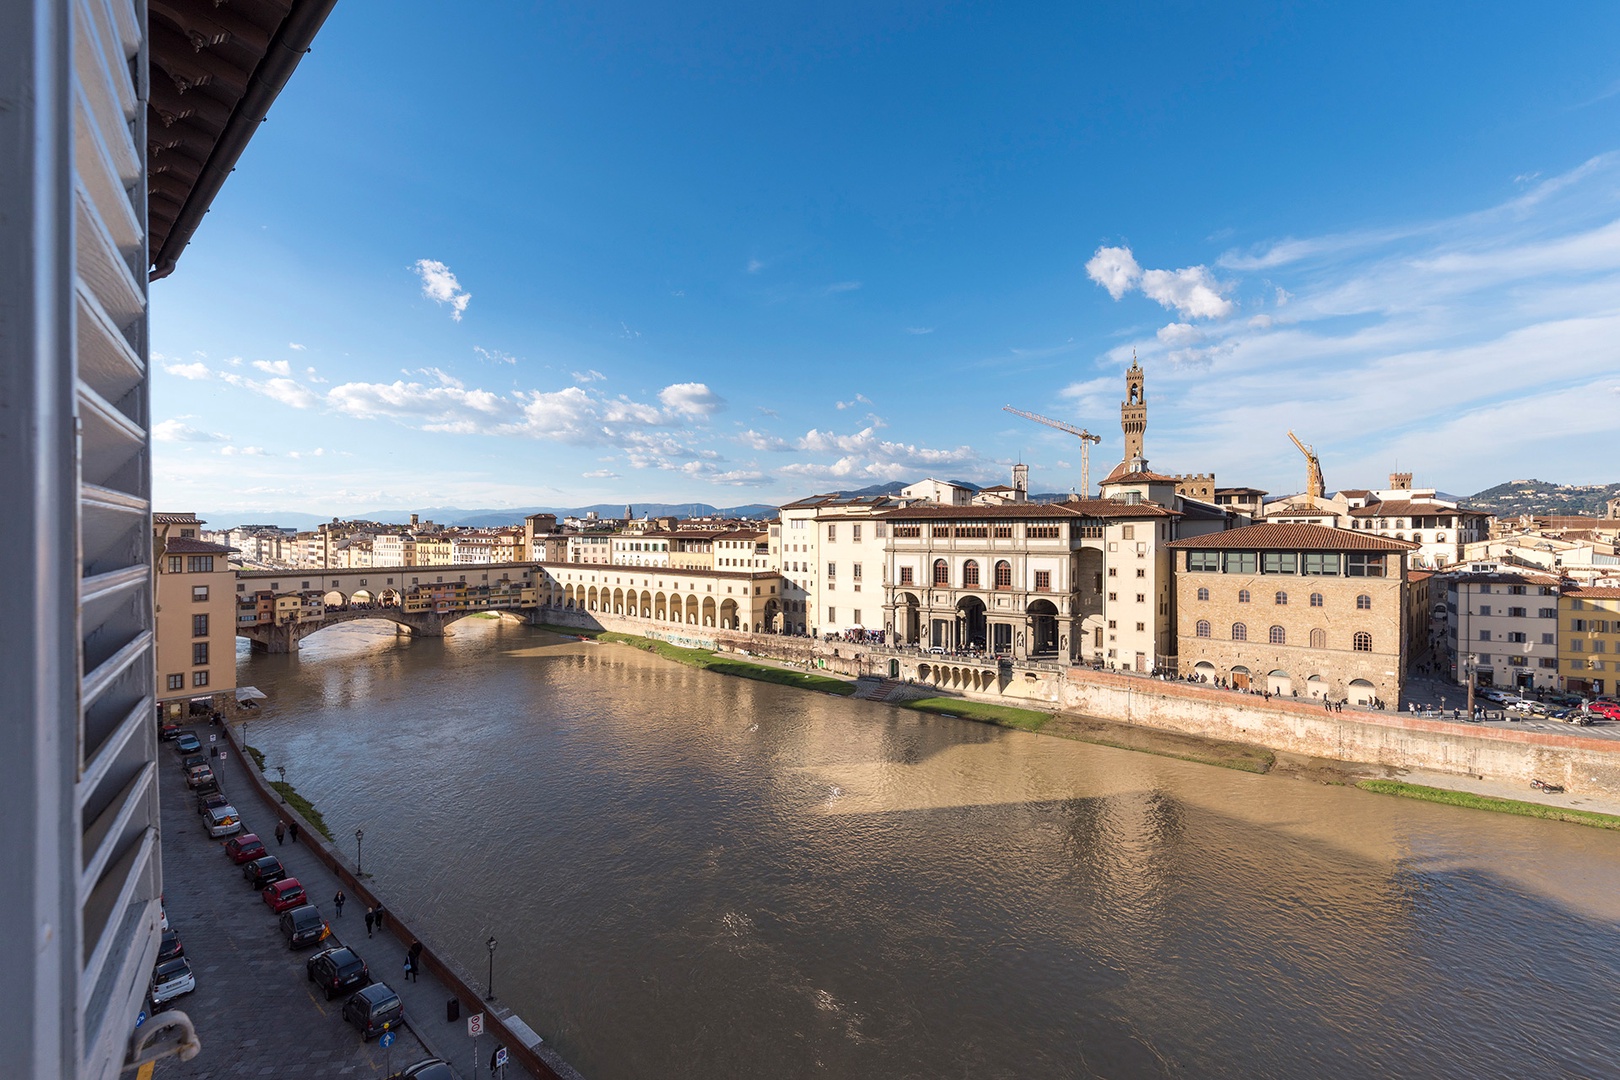 The view from this apartment is wonderful_ the Arno river, the Uffizi and the Ponte Vecchio.